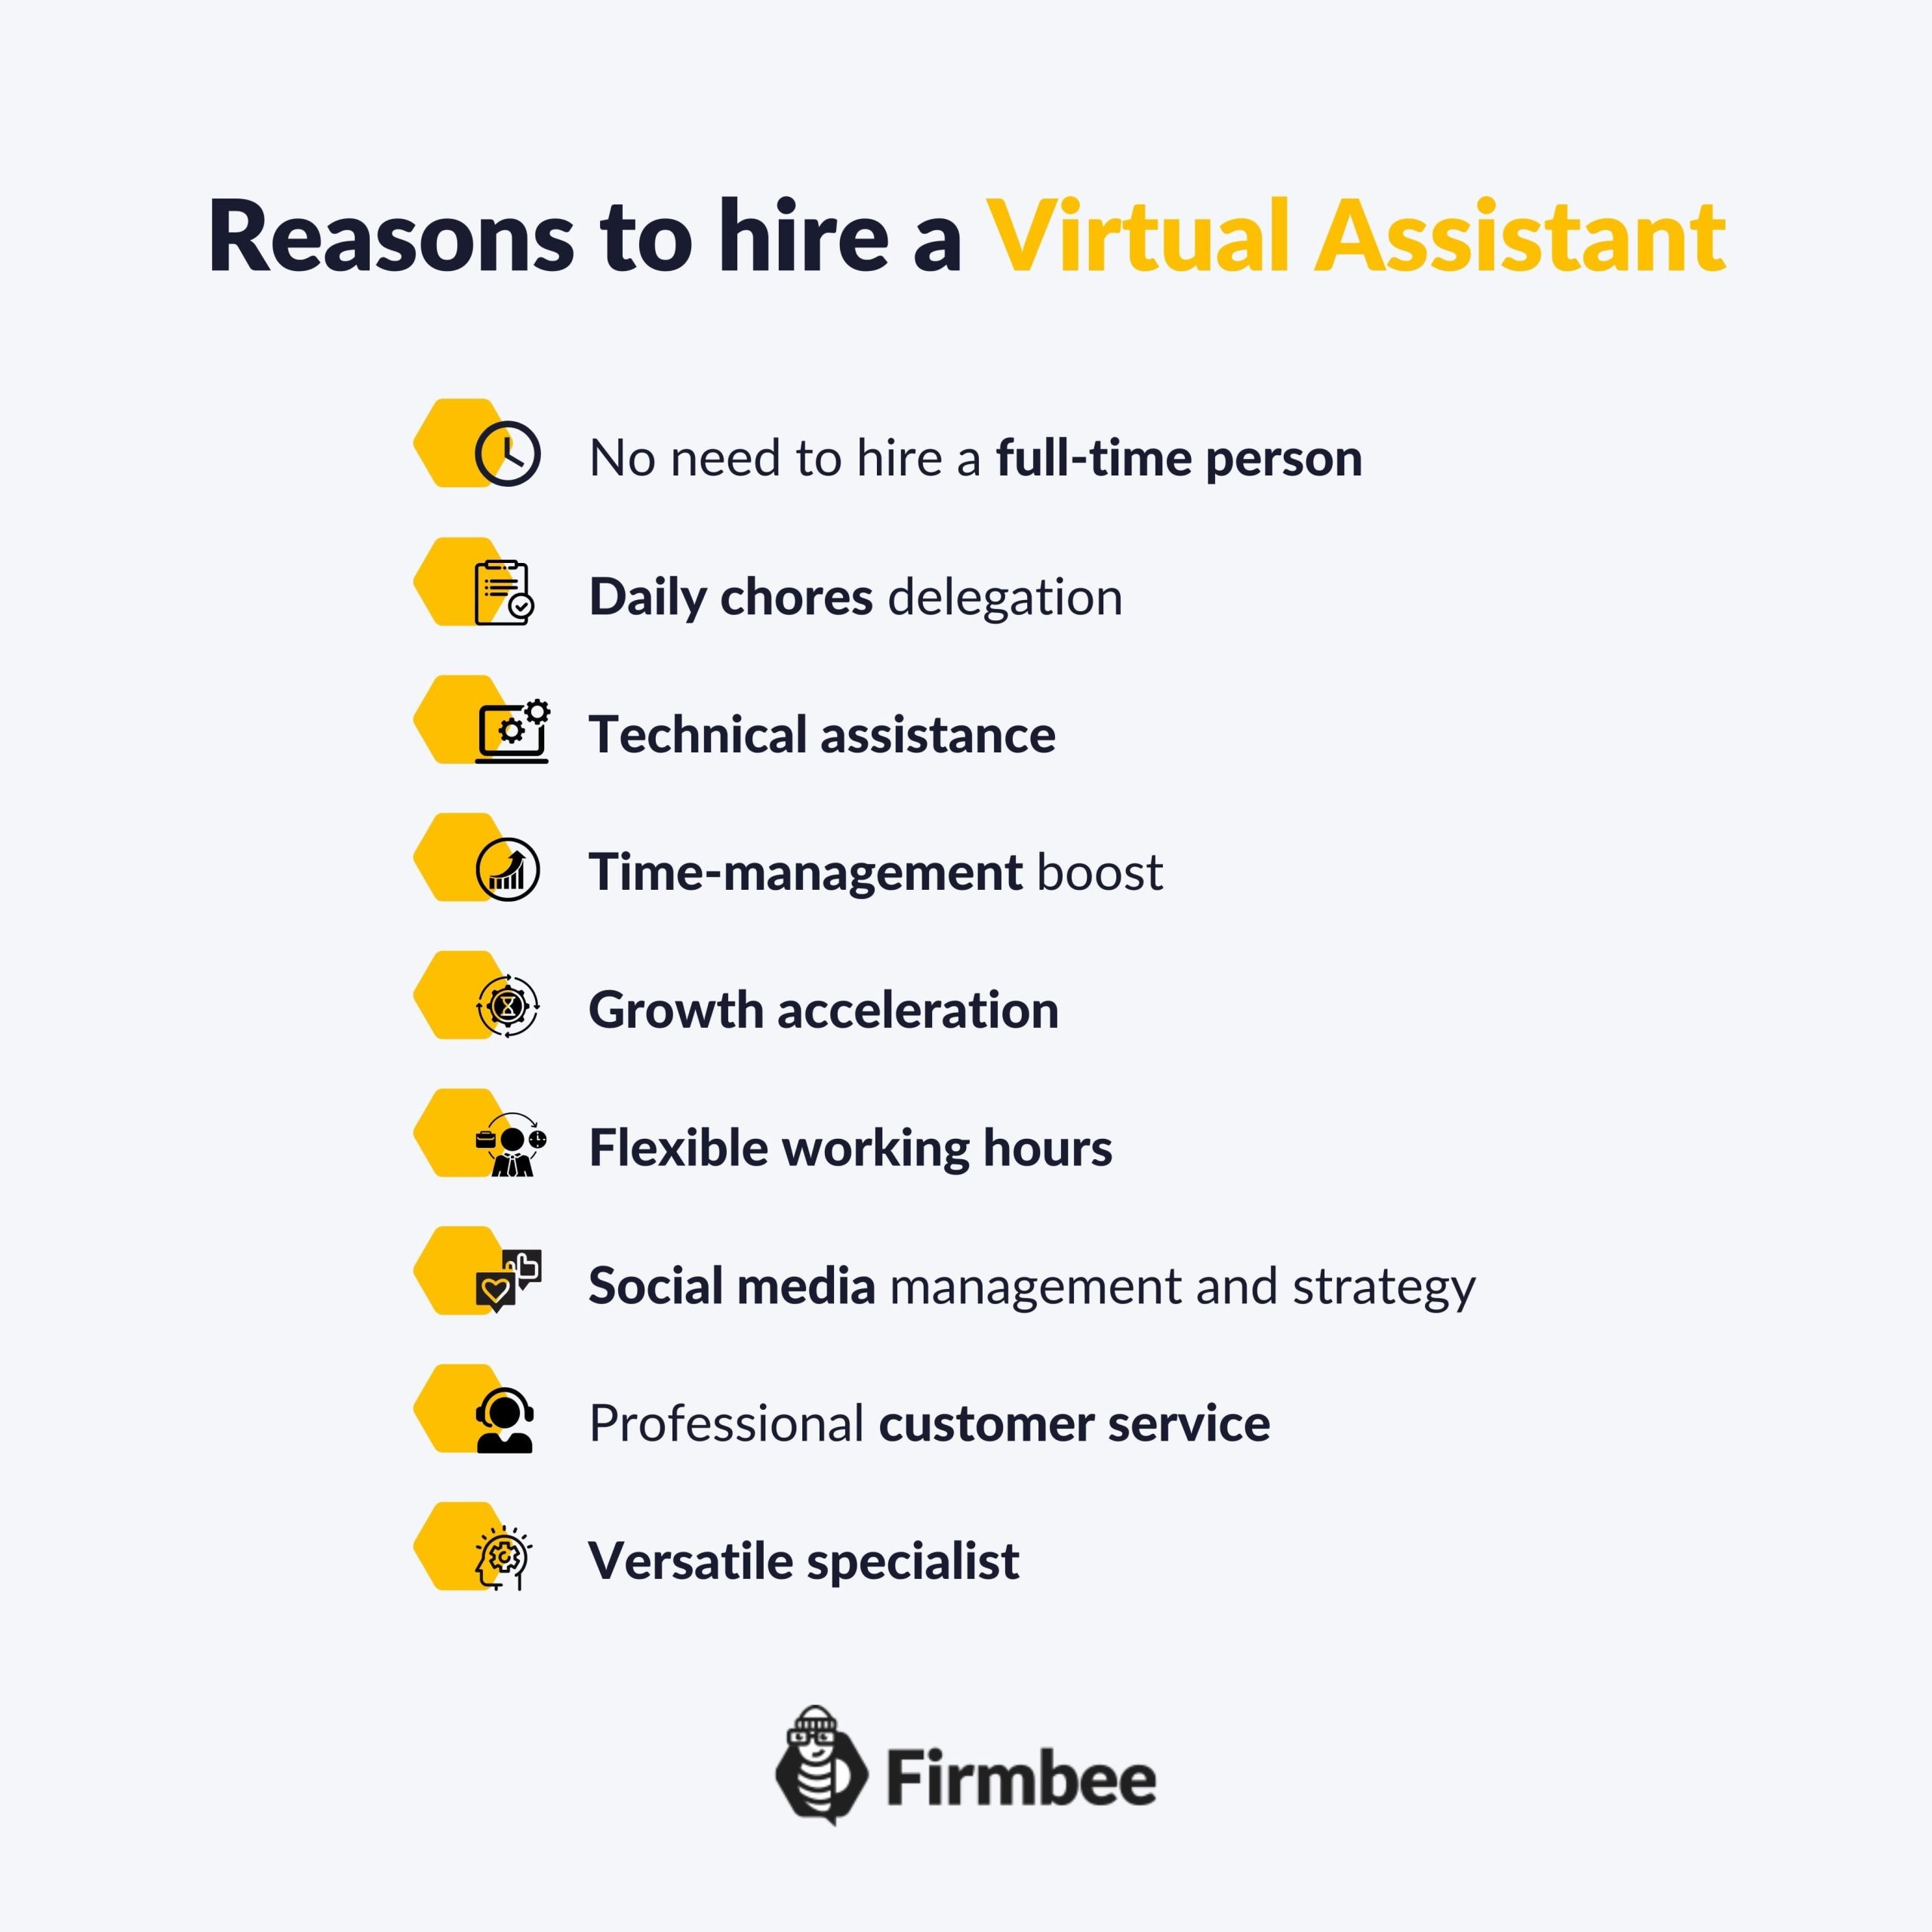 11 reasons to hire a virtual assistant in your business